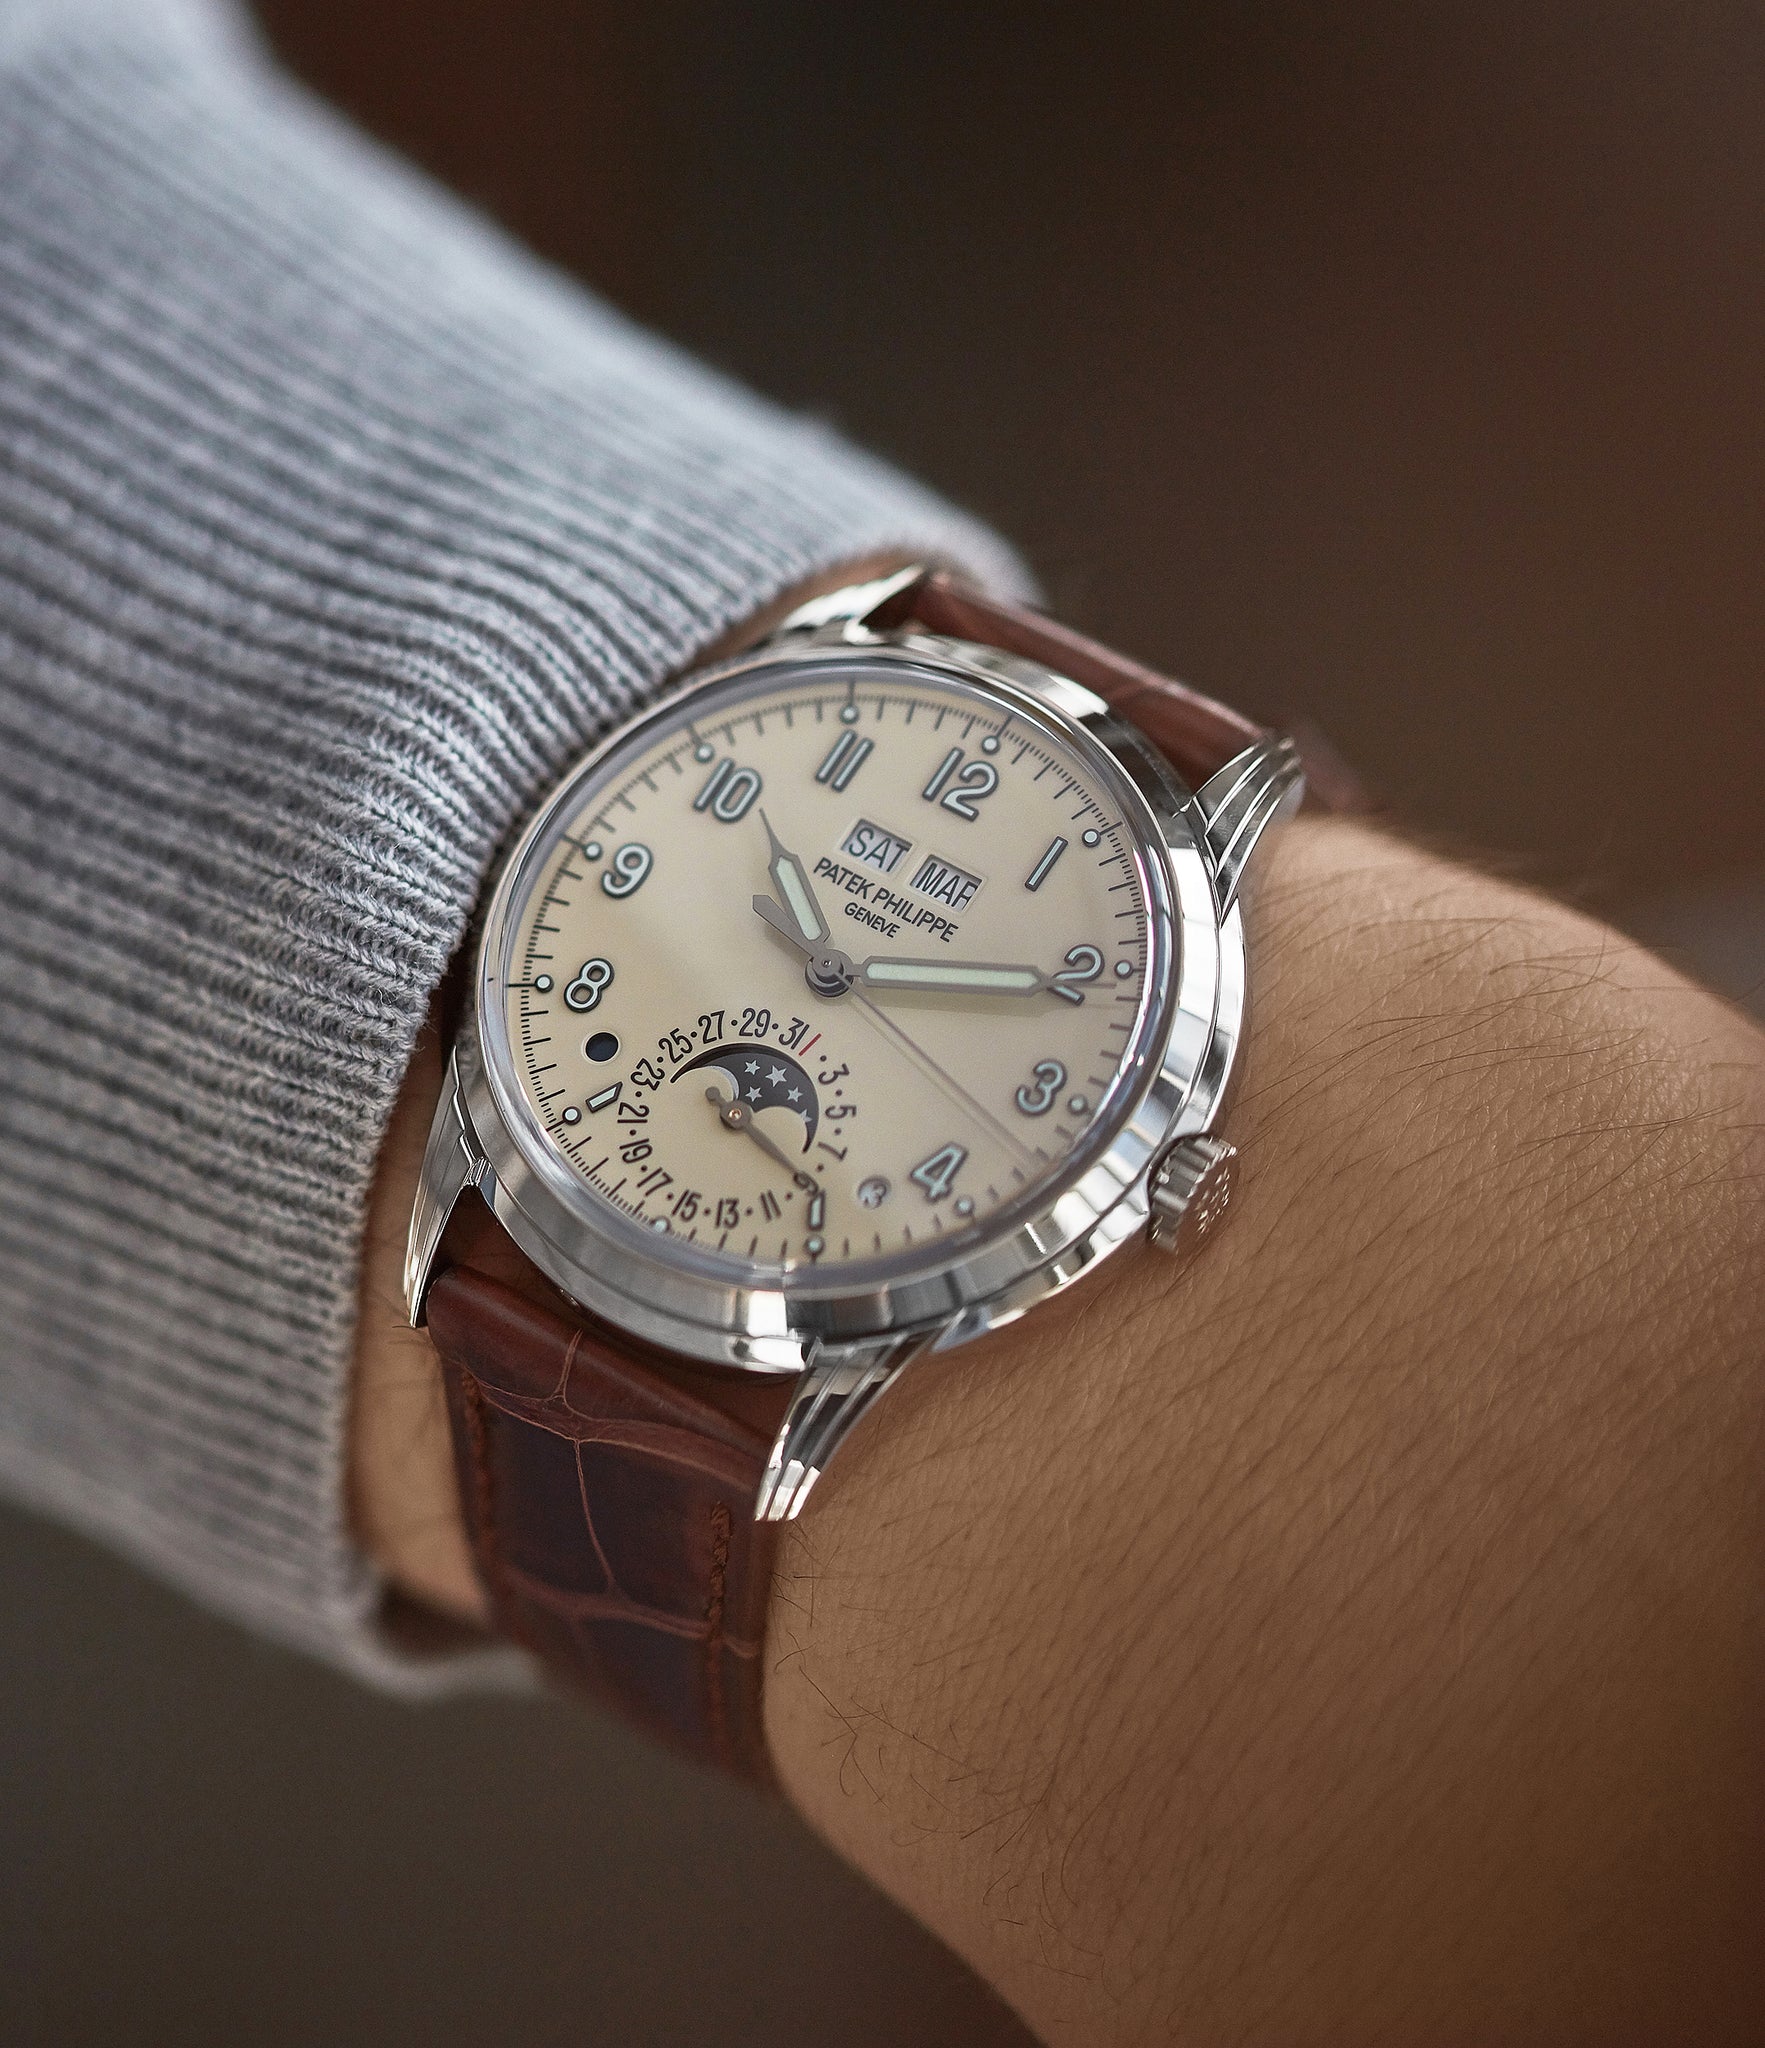 on the wrist Patek Philippe 5320G-001 Perpetual Calendar white gold watch for sale online at A Collected Man London UK specialist of rare watches